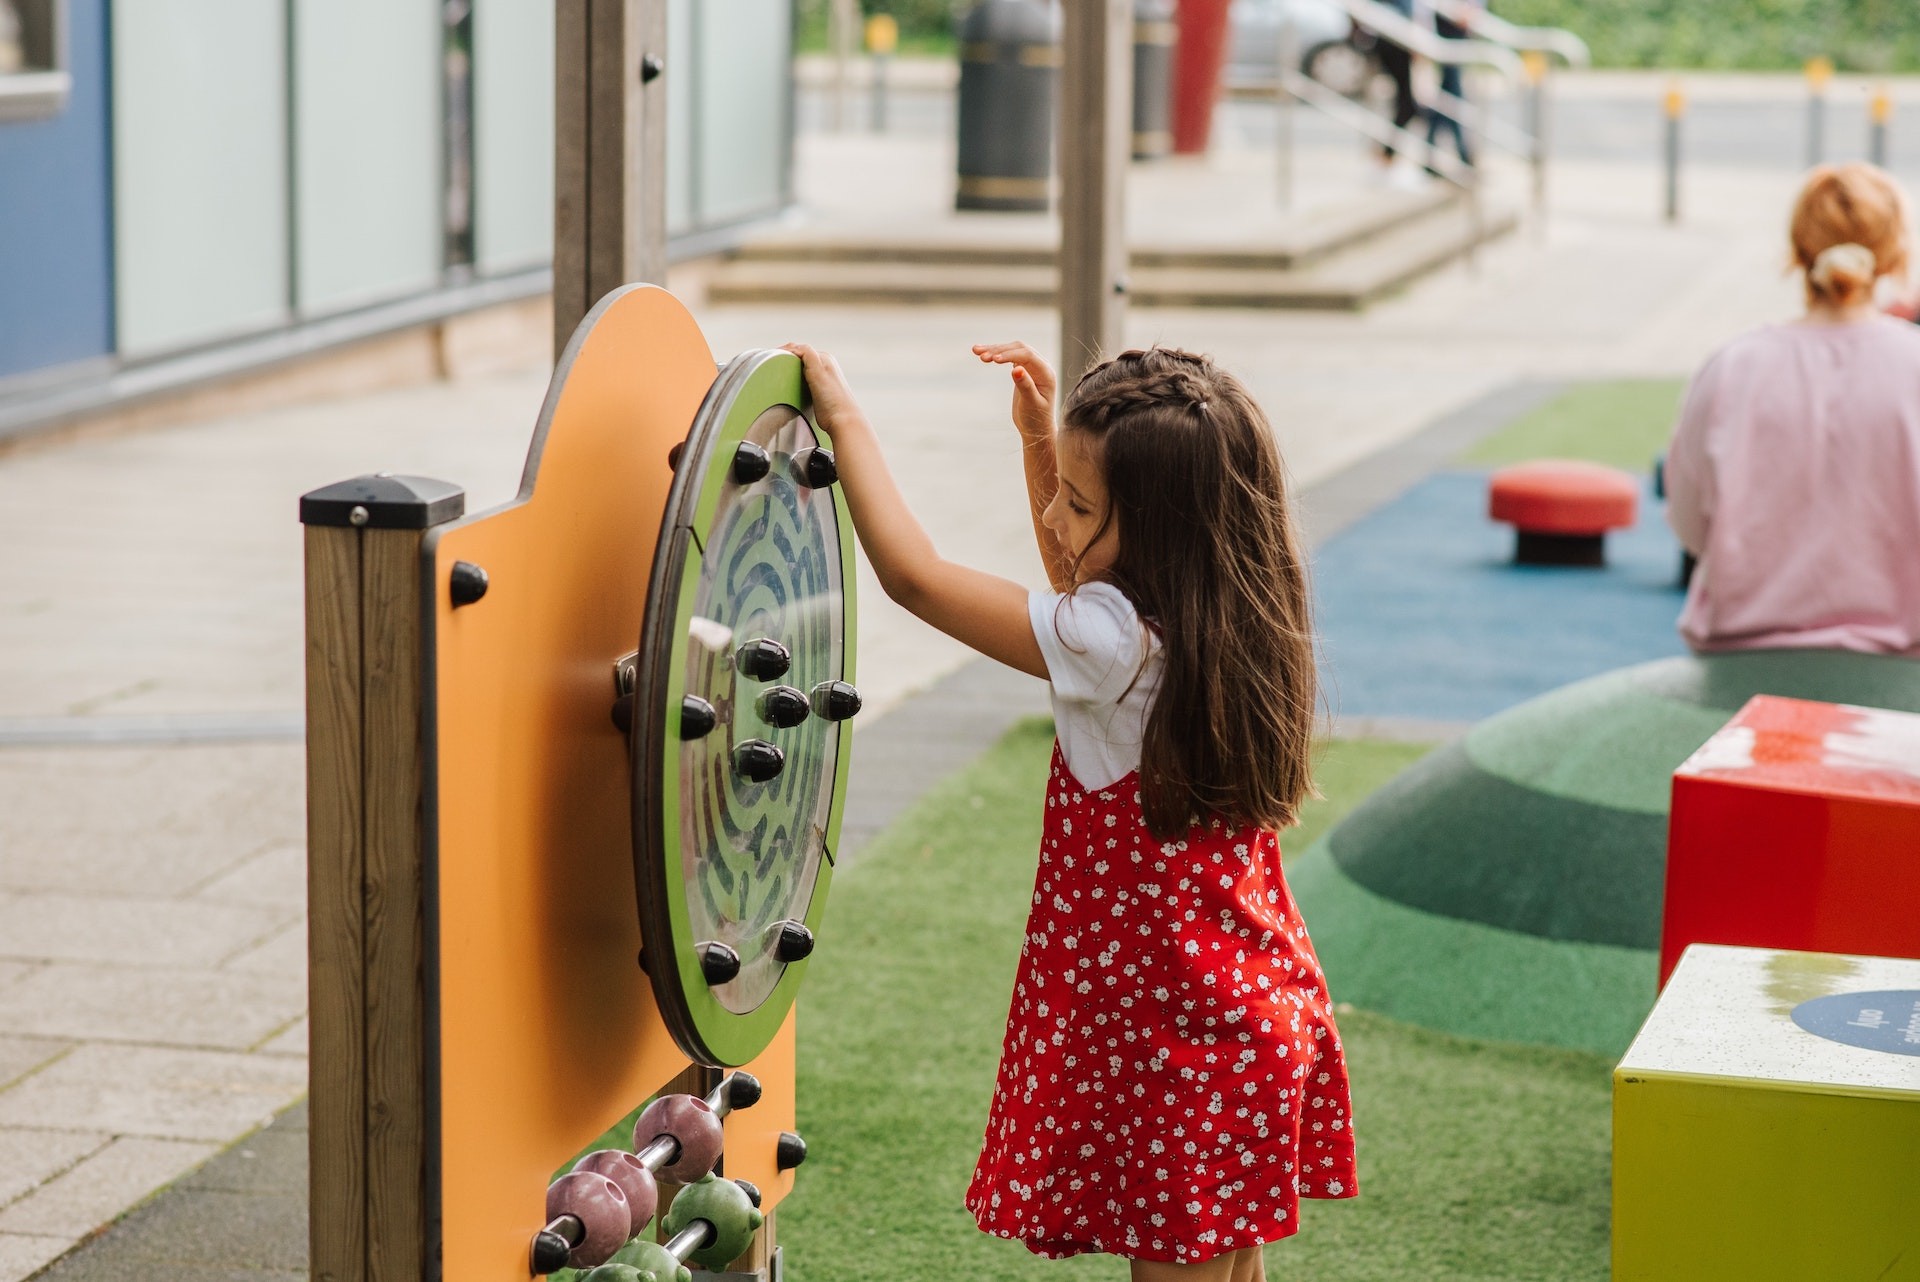 Featured image of Child in red dress spinning a play wheel on playground